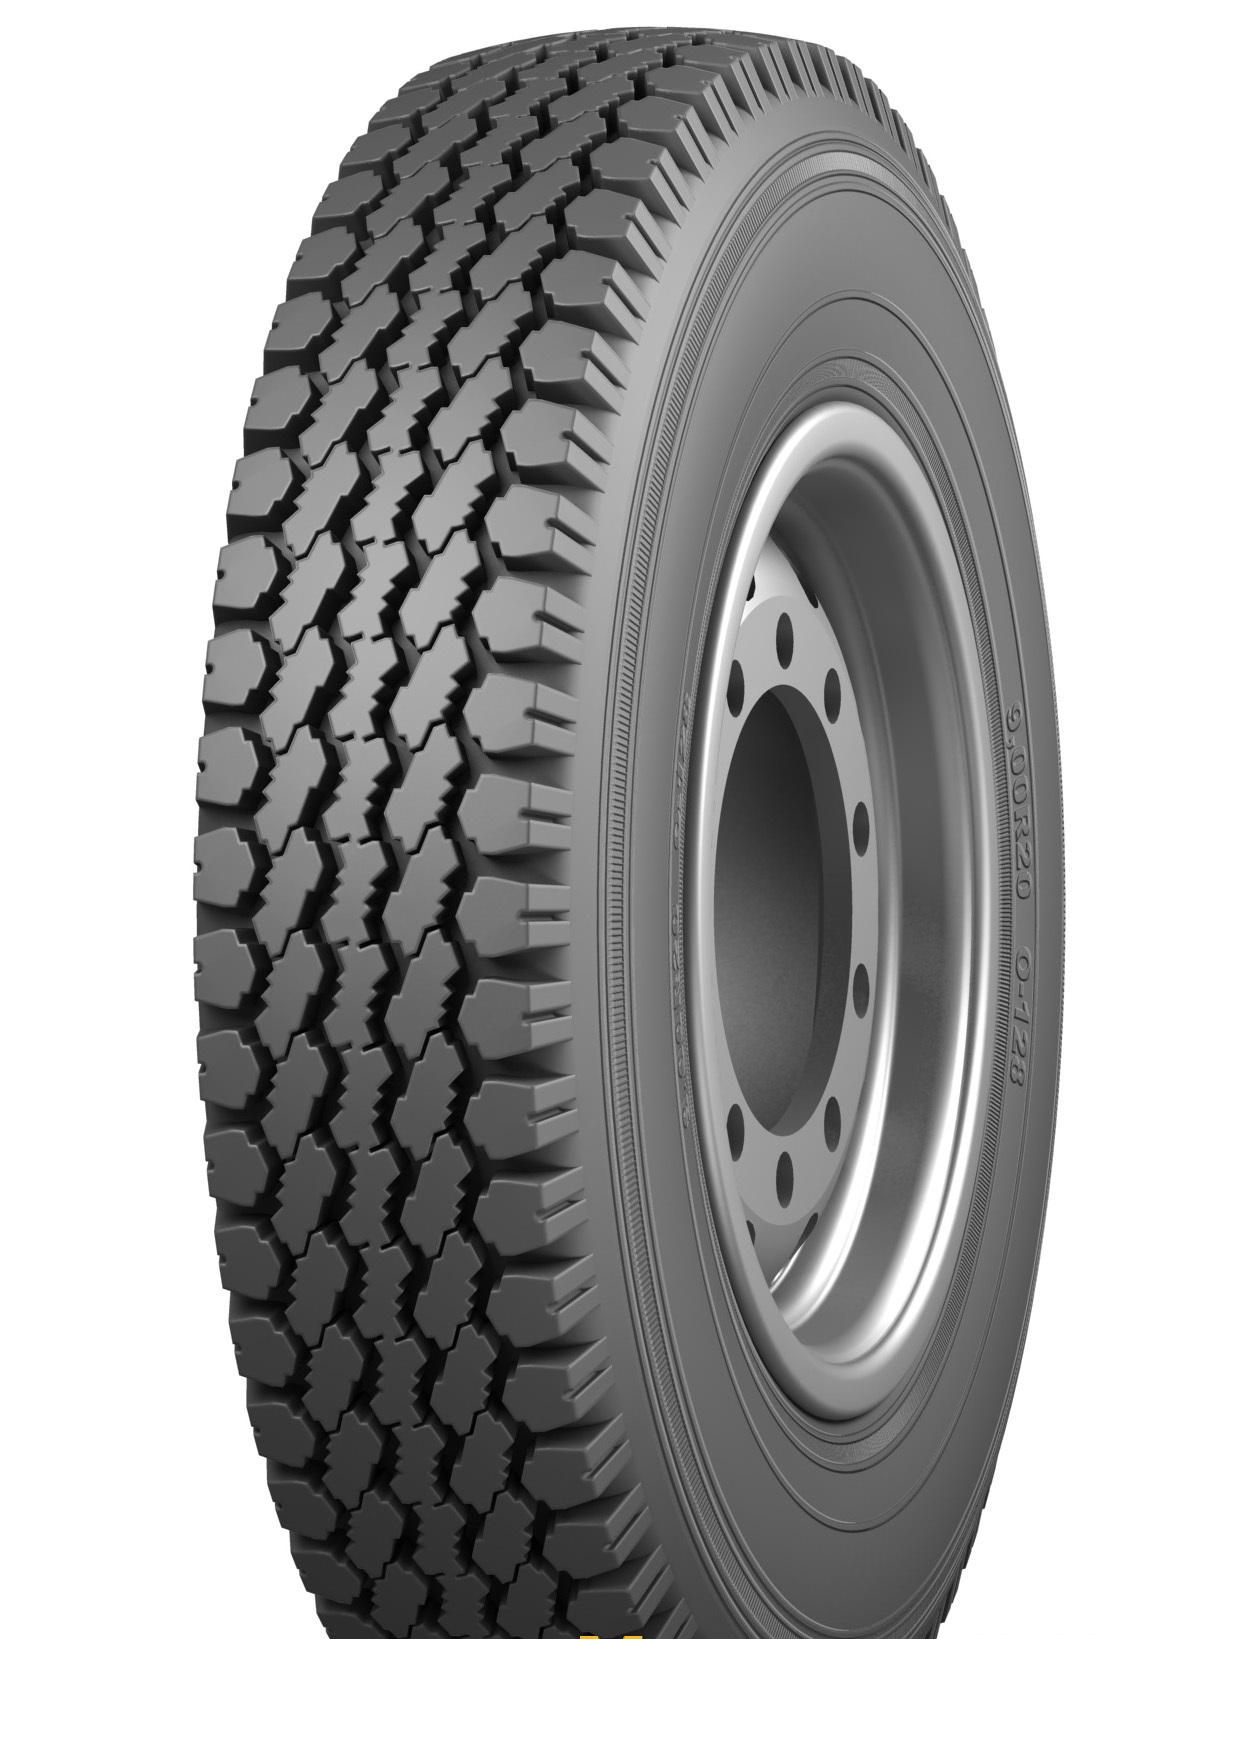 Truck Tire Tyrex All Steel Mix YA-656 315/80R22.5 156K - picture, photo, image